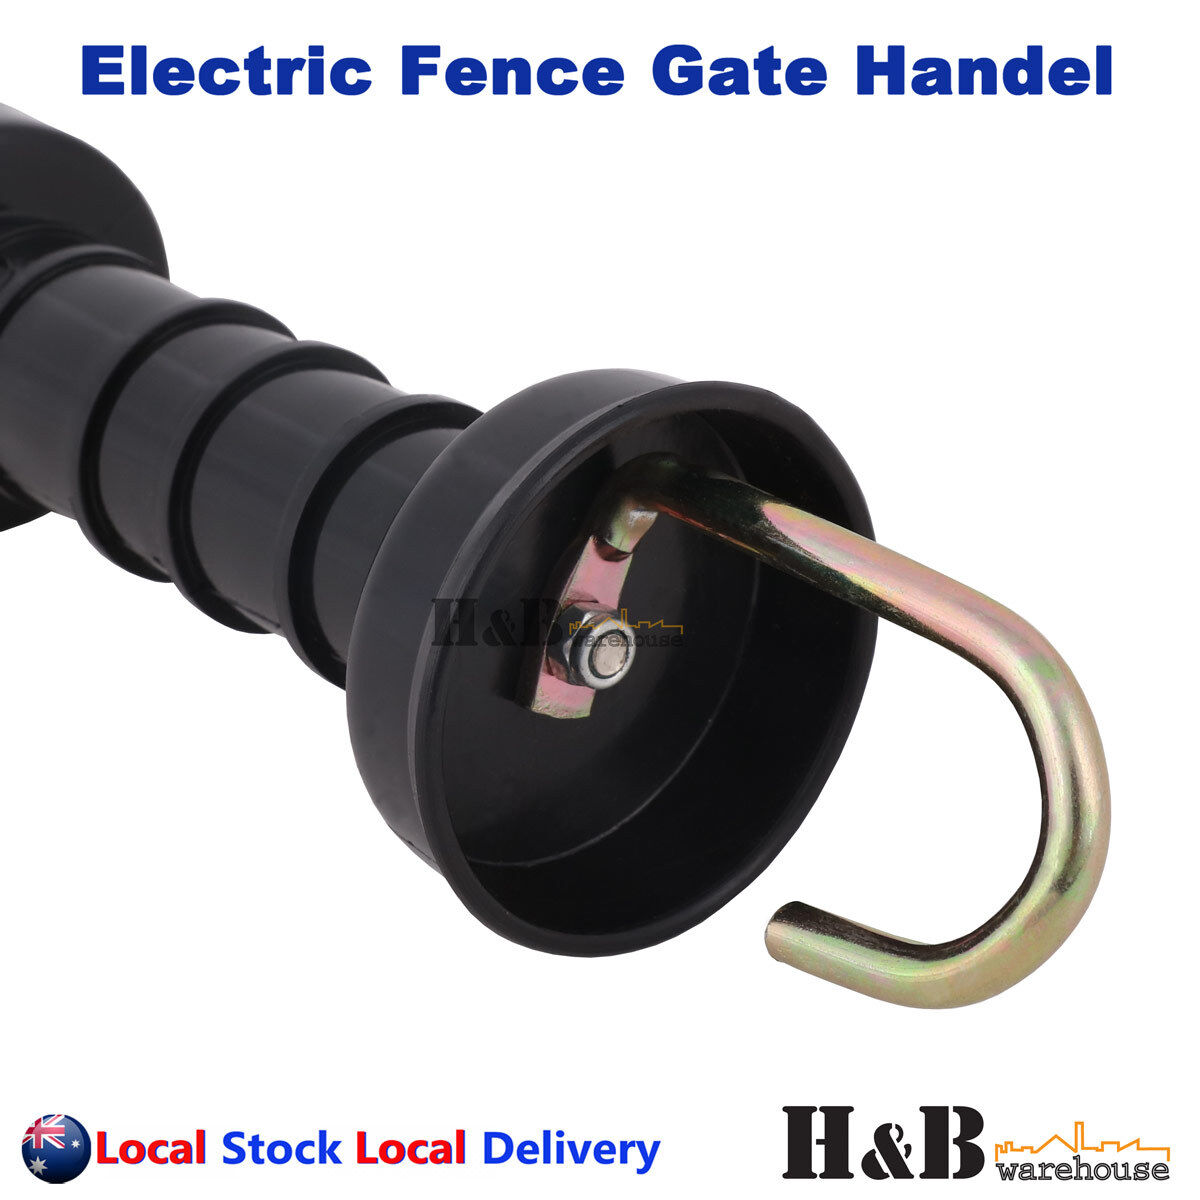 5 Pcs Electric Fence Gate Handle Insulated Spring Handles Black